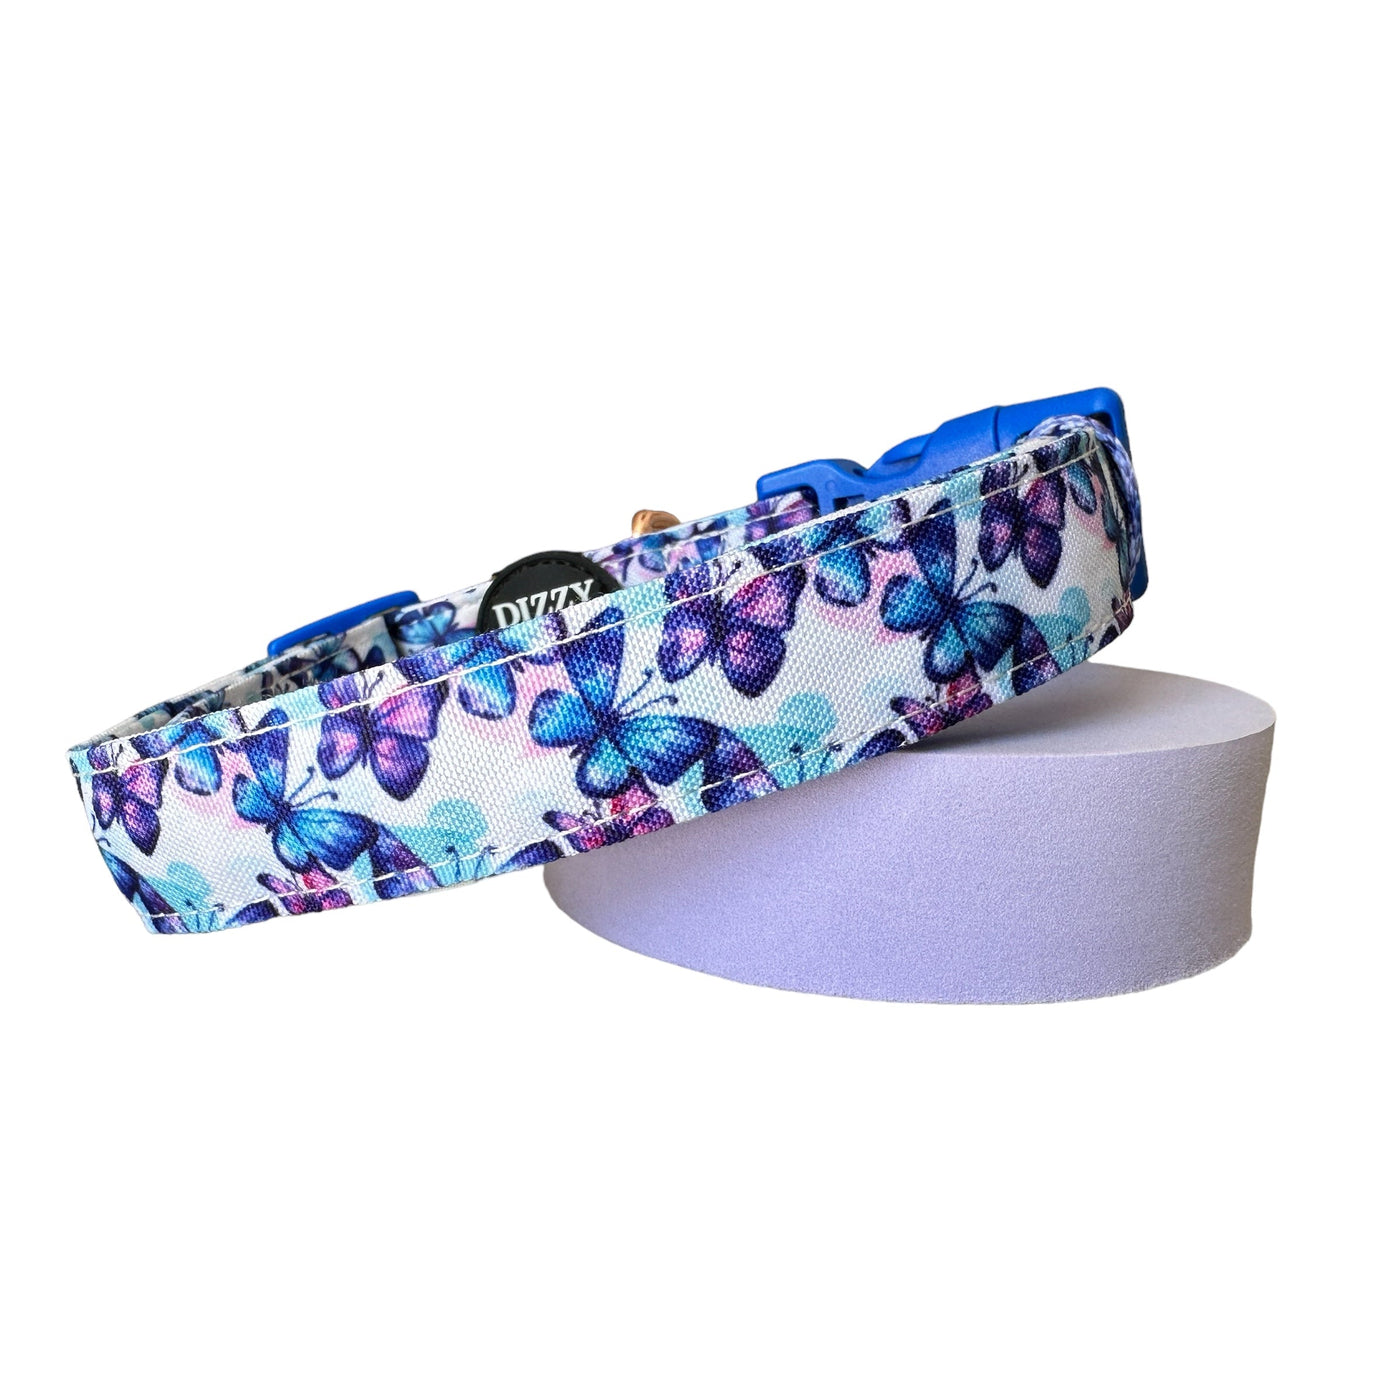 Butterfly Ballet Dog Collar | Canvas and Neoprene Dog Collar-Dog Collar-Dizzy Dog Collars